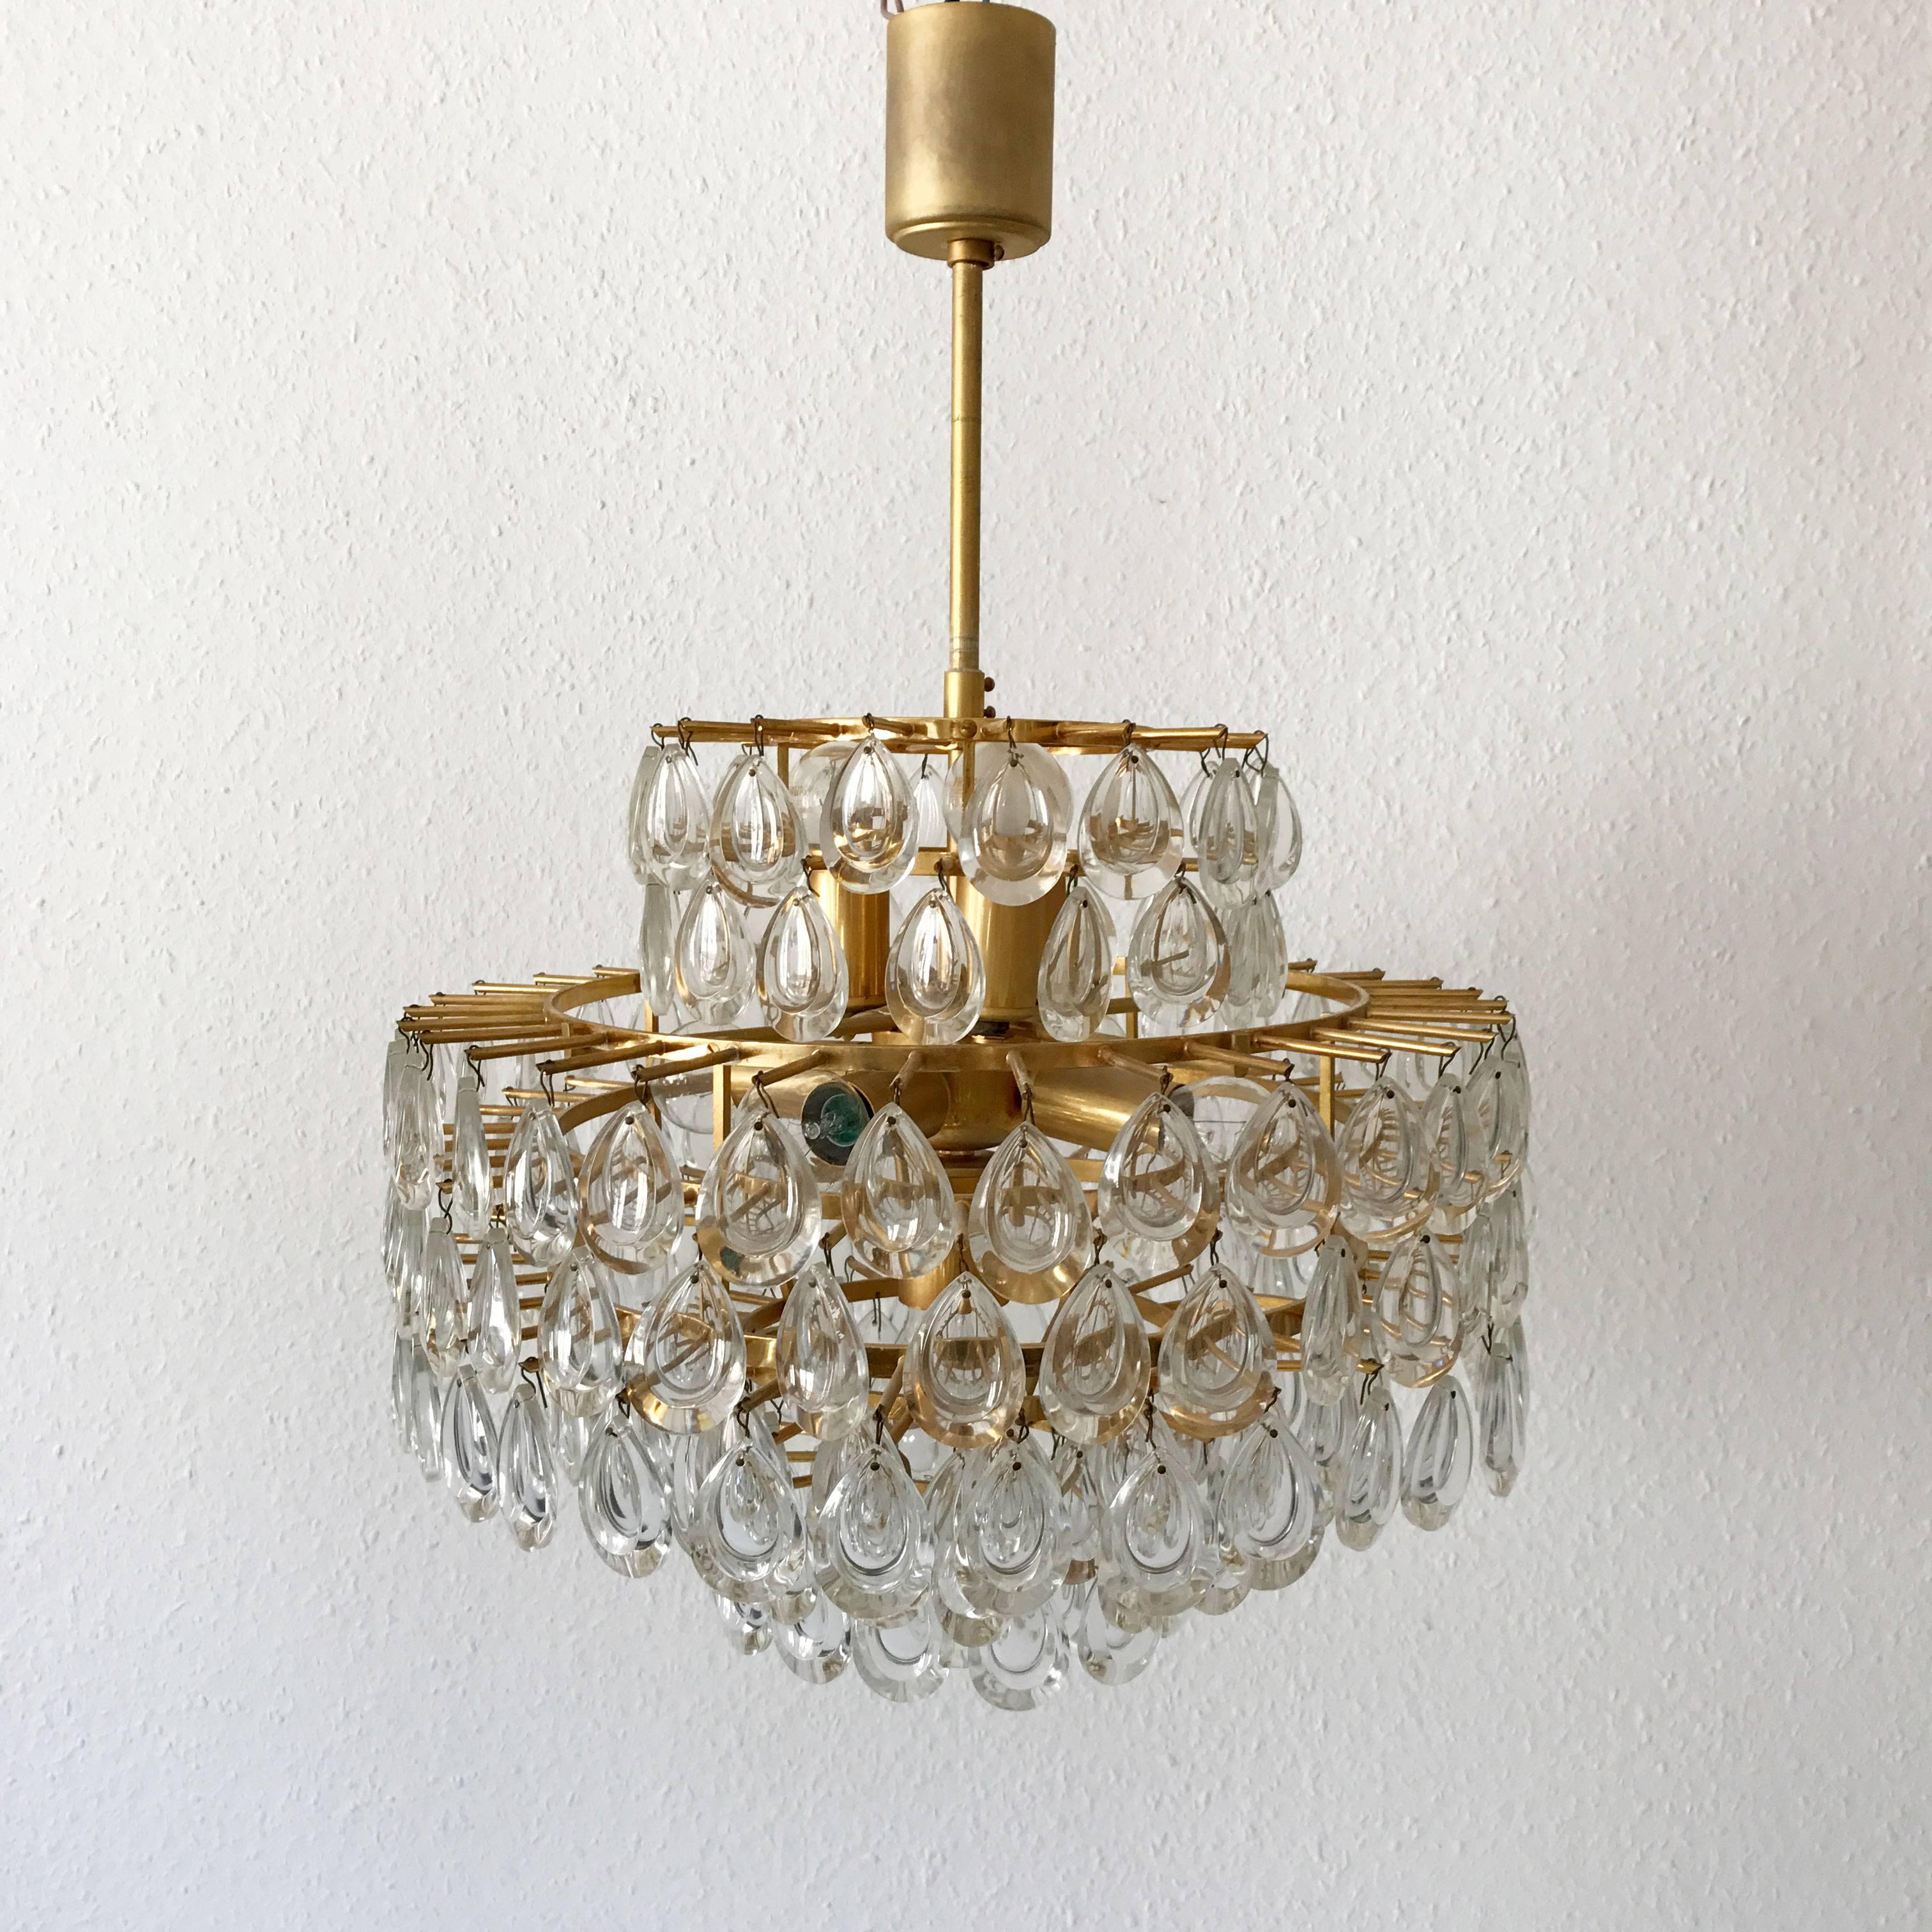 Mid-Century Modern Seven-Tiered Gilt Brass Chandelier or Pendant Lamp by Palwa Germany 1960s For Sale